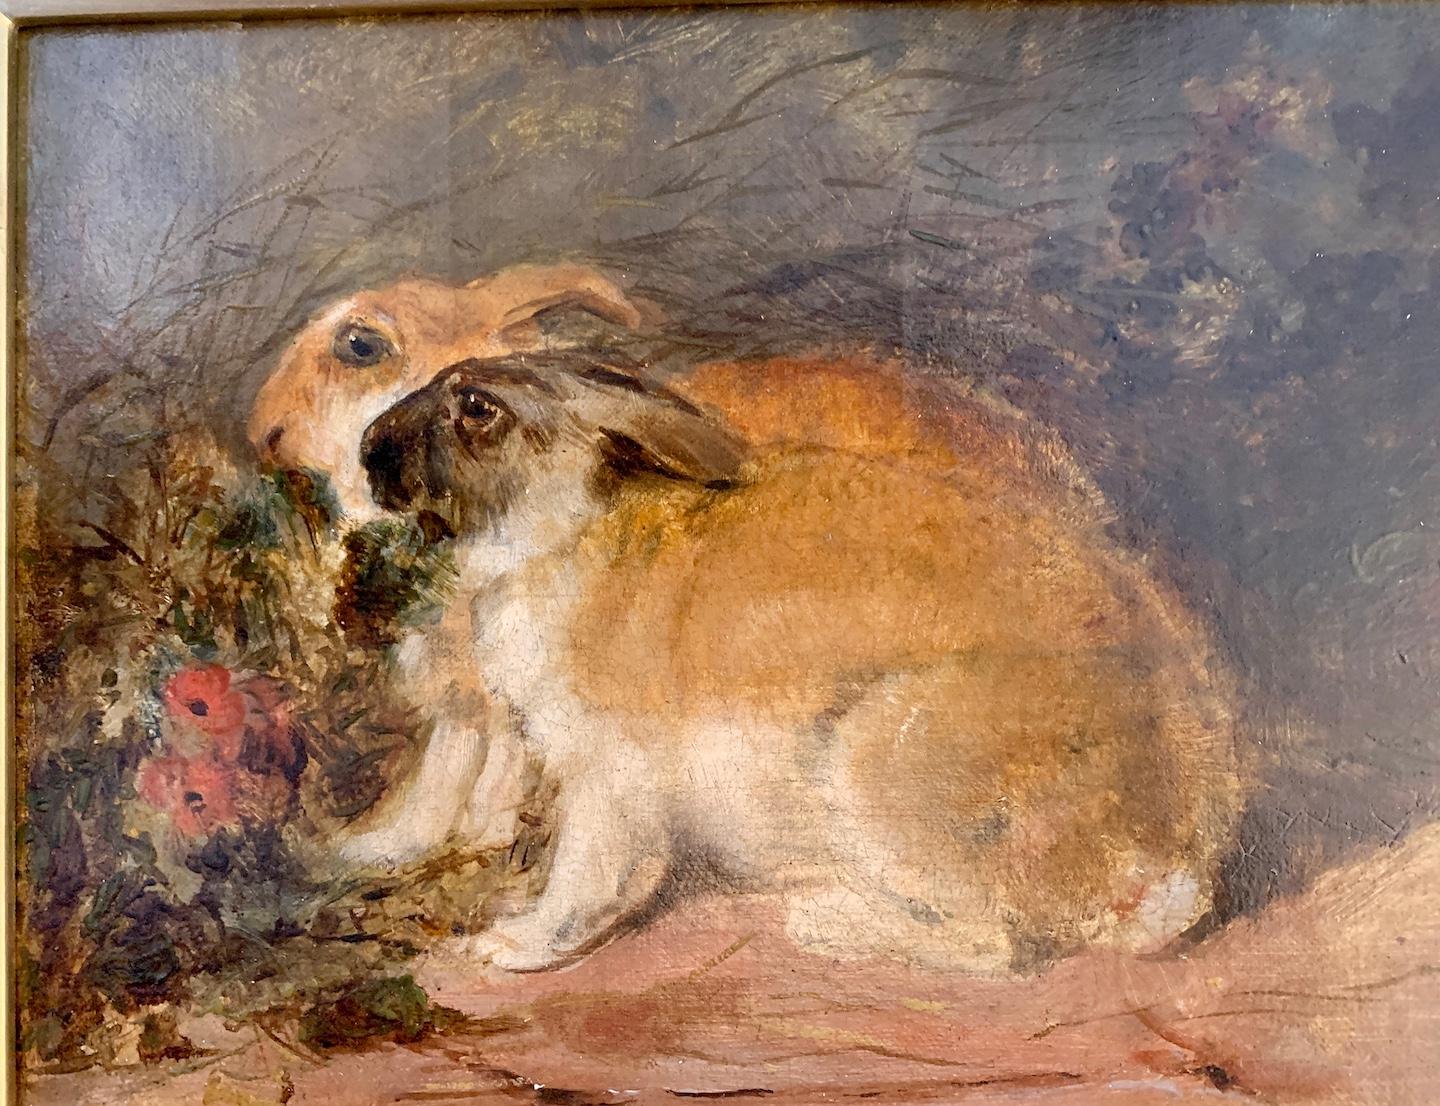 19th century English Antique oil  portrait of two Rabbits in an interior - Painting by Thomas William Earl